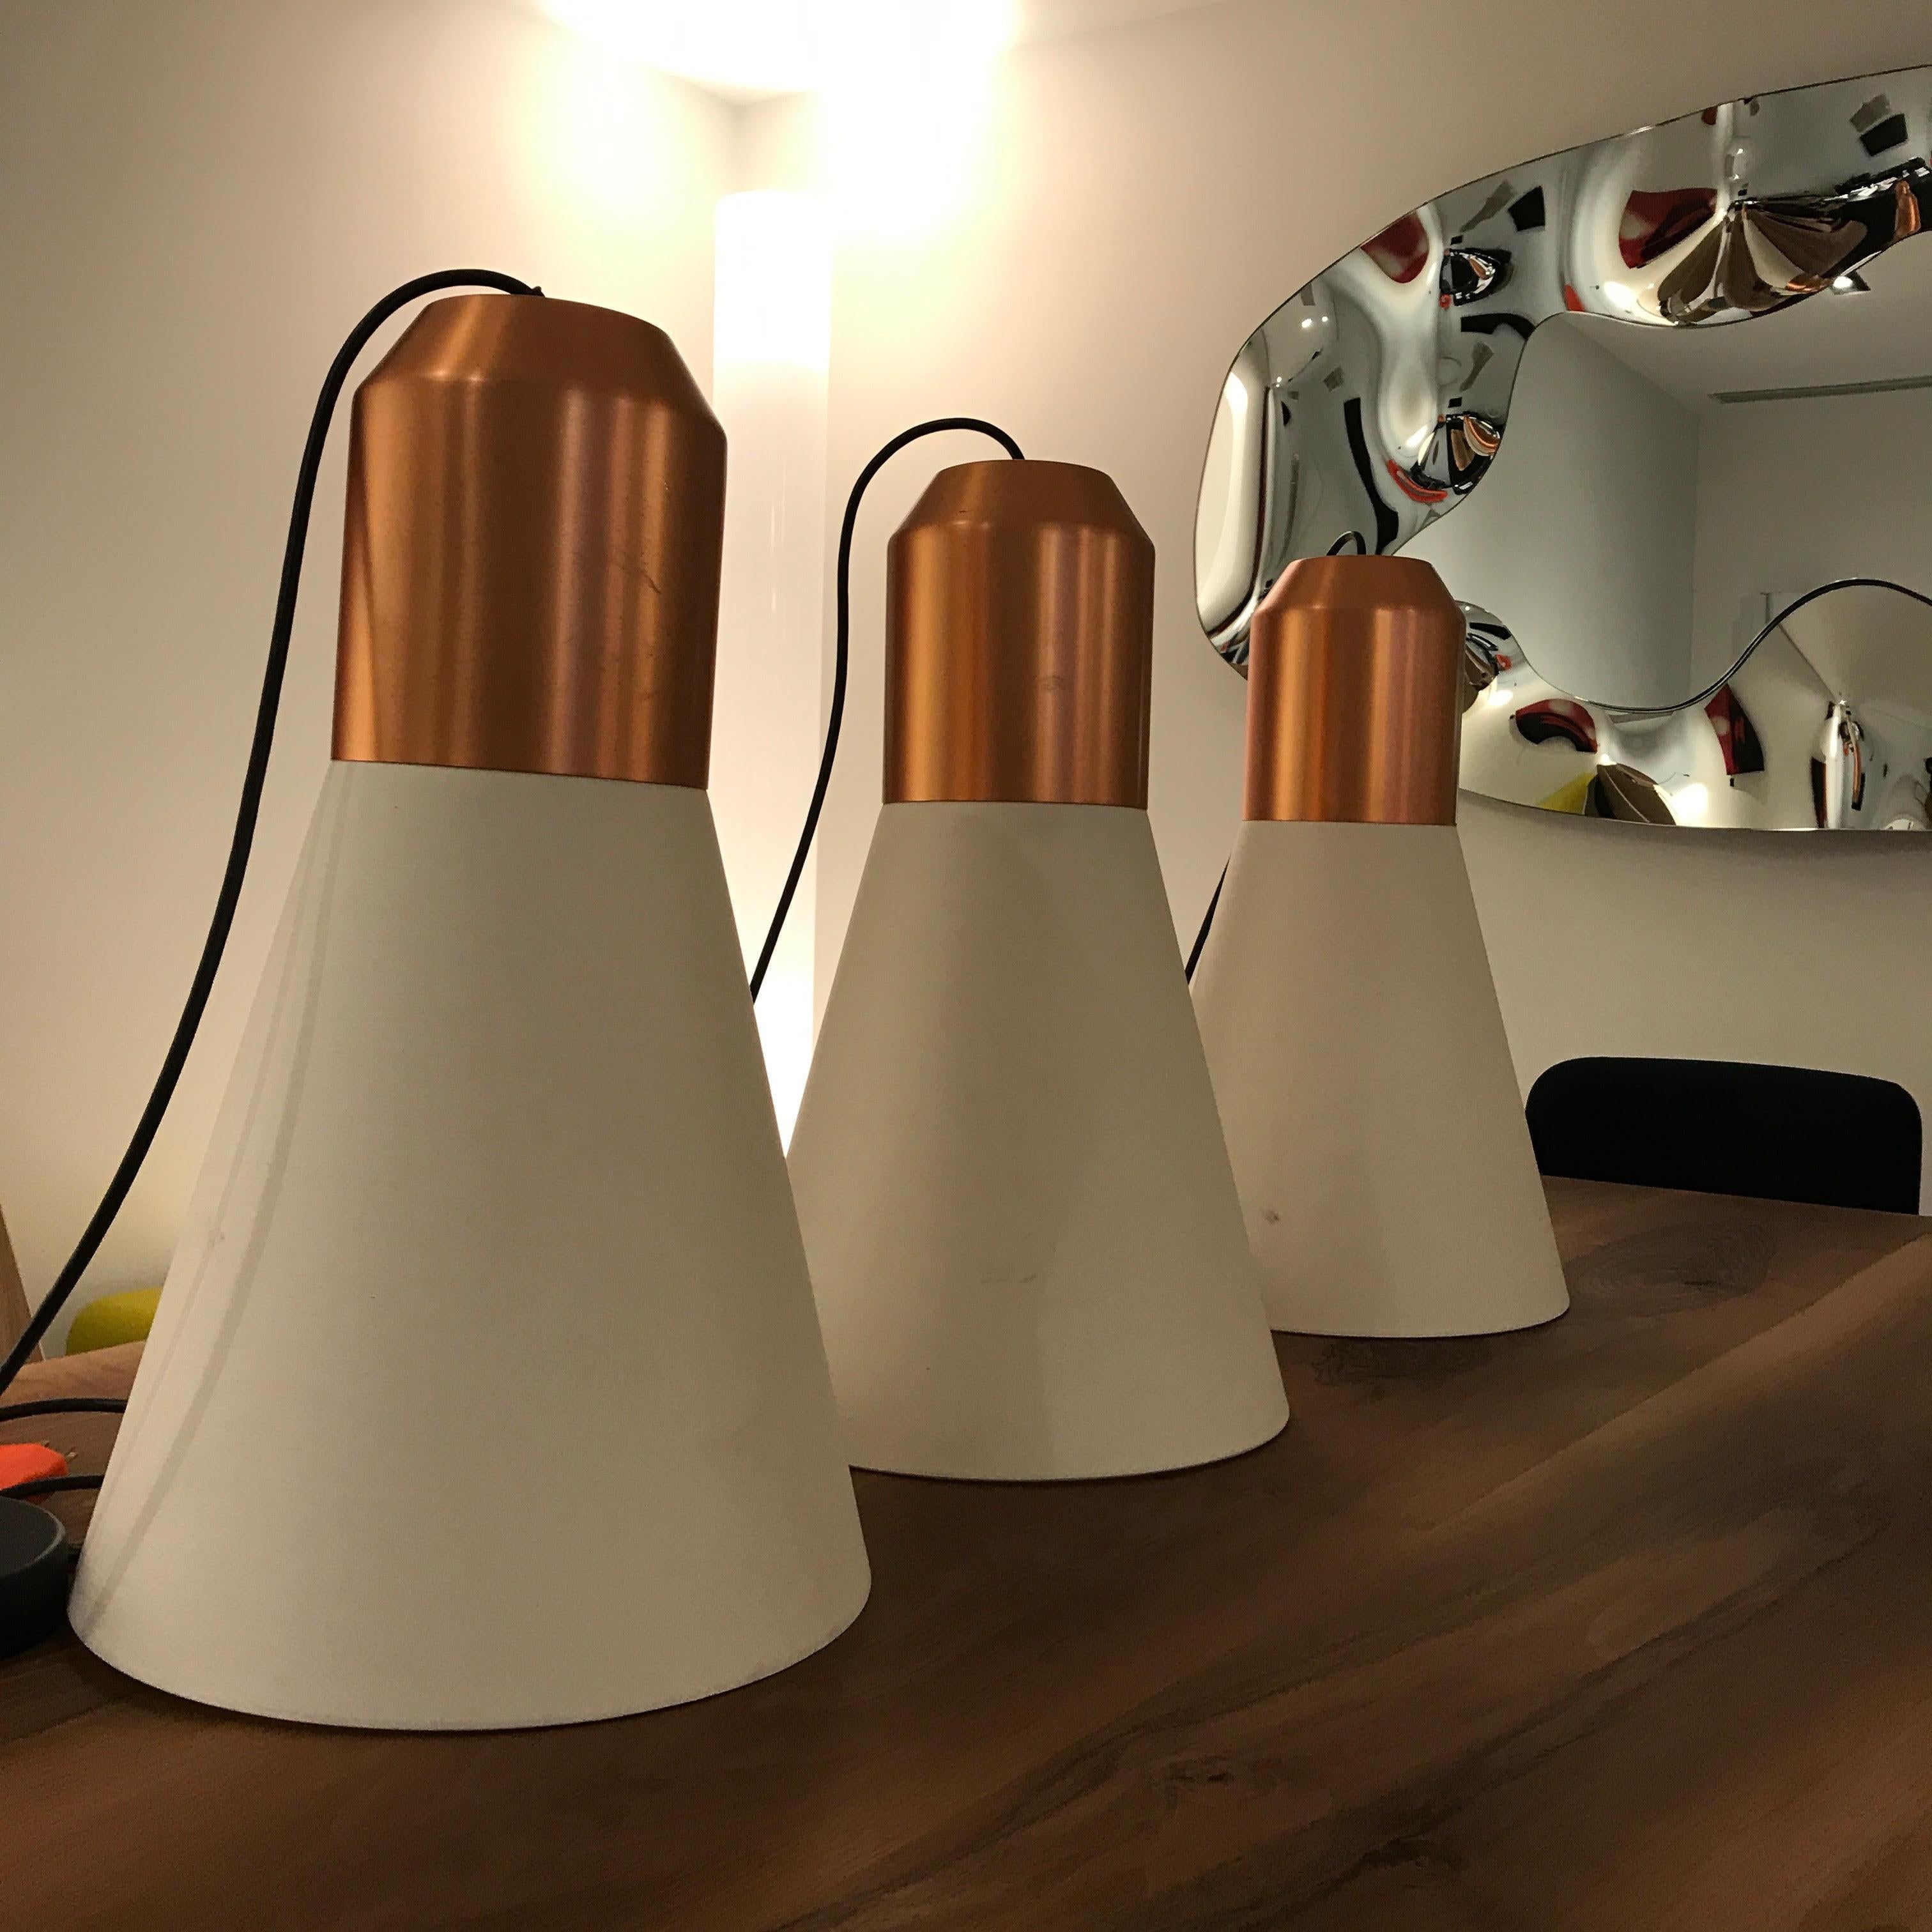 ClassiCon bell lamps with shade copper top
White share 32CM D x 53CM H
Sebastian Herkner 2013
UL listed / US 110V
Normally $840 each.